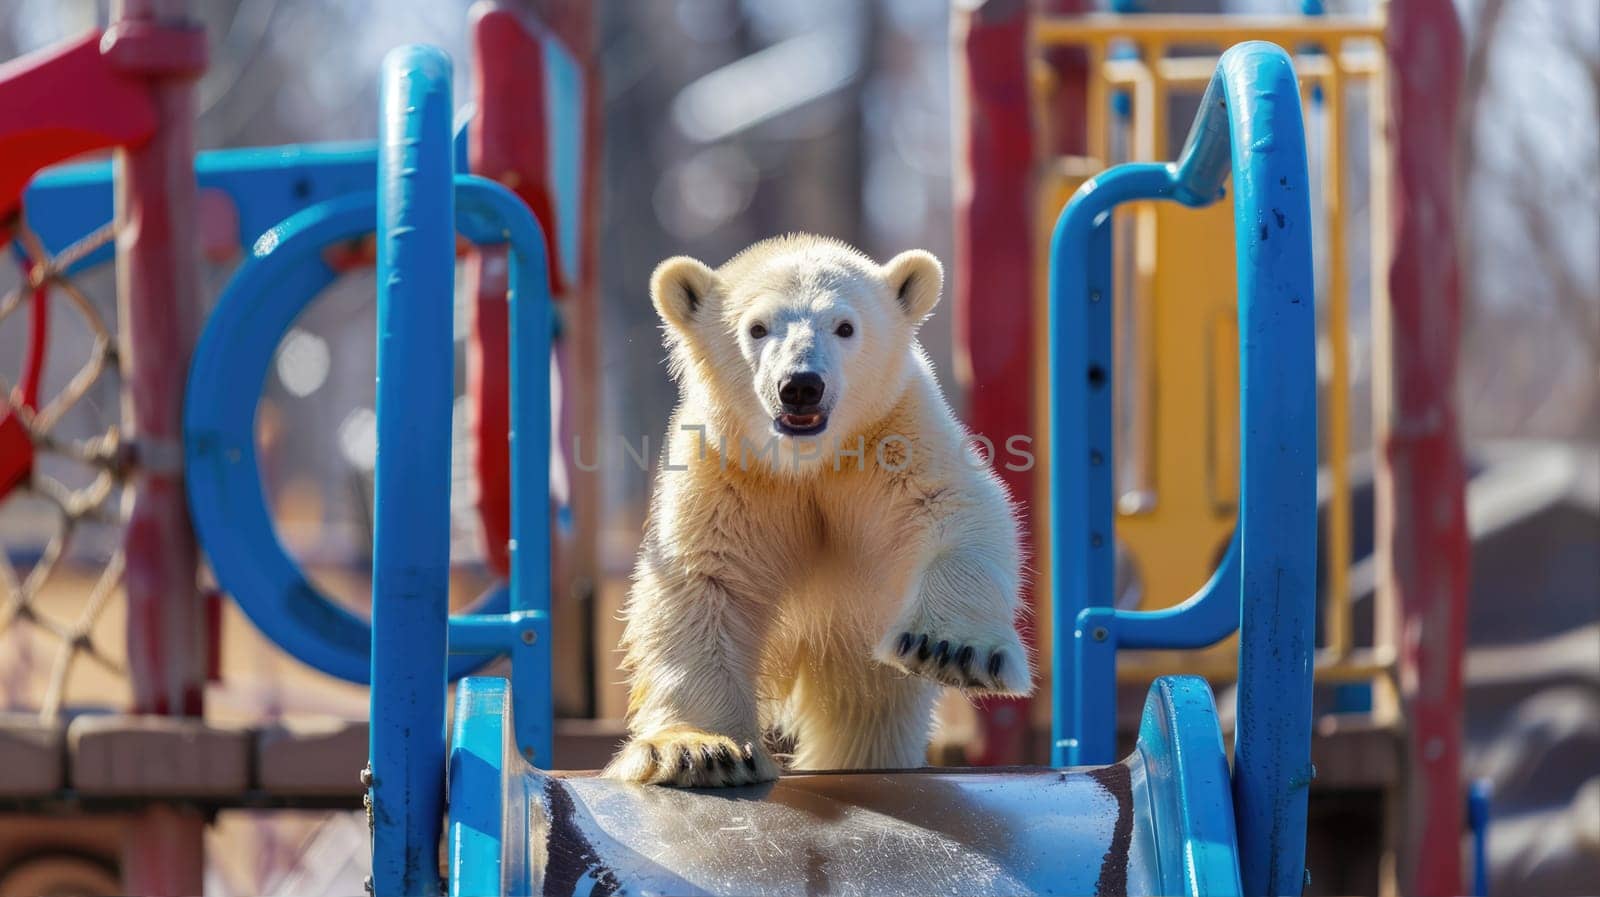 Polar bear playing on the playground by natali_brill